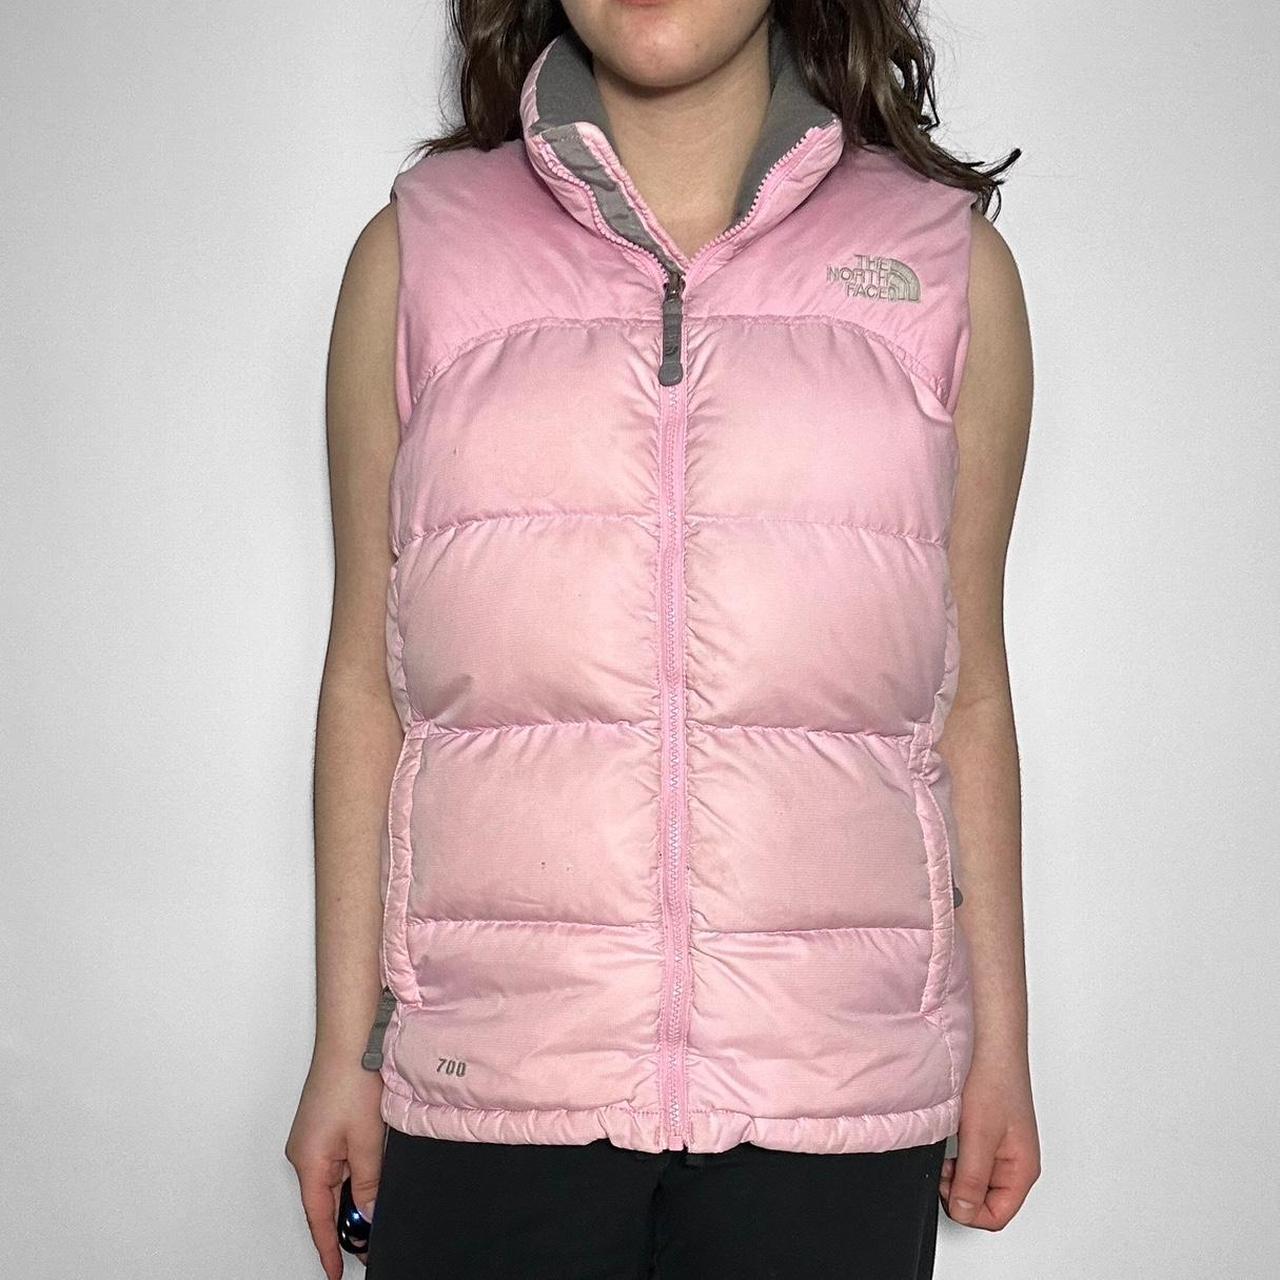 Vintage 90s The North Face 700 Nuptse puffer gilet in baby pink